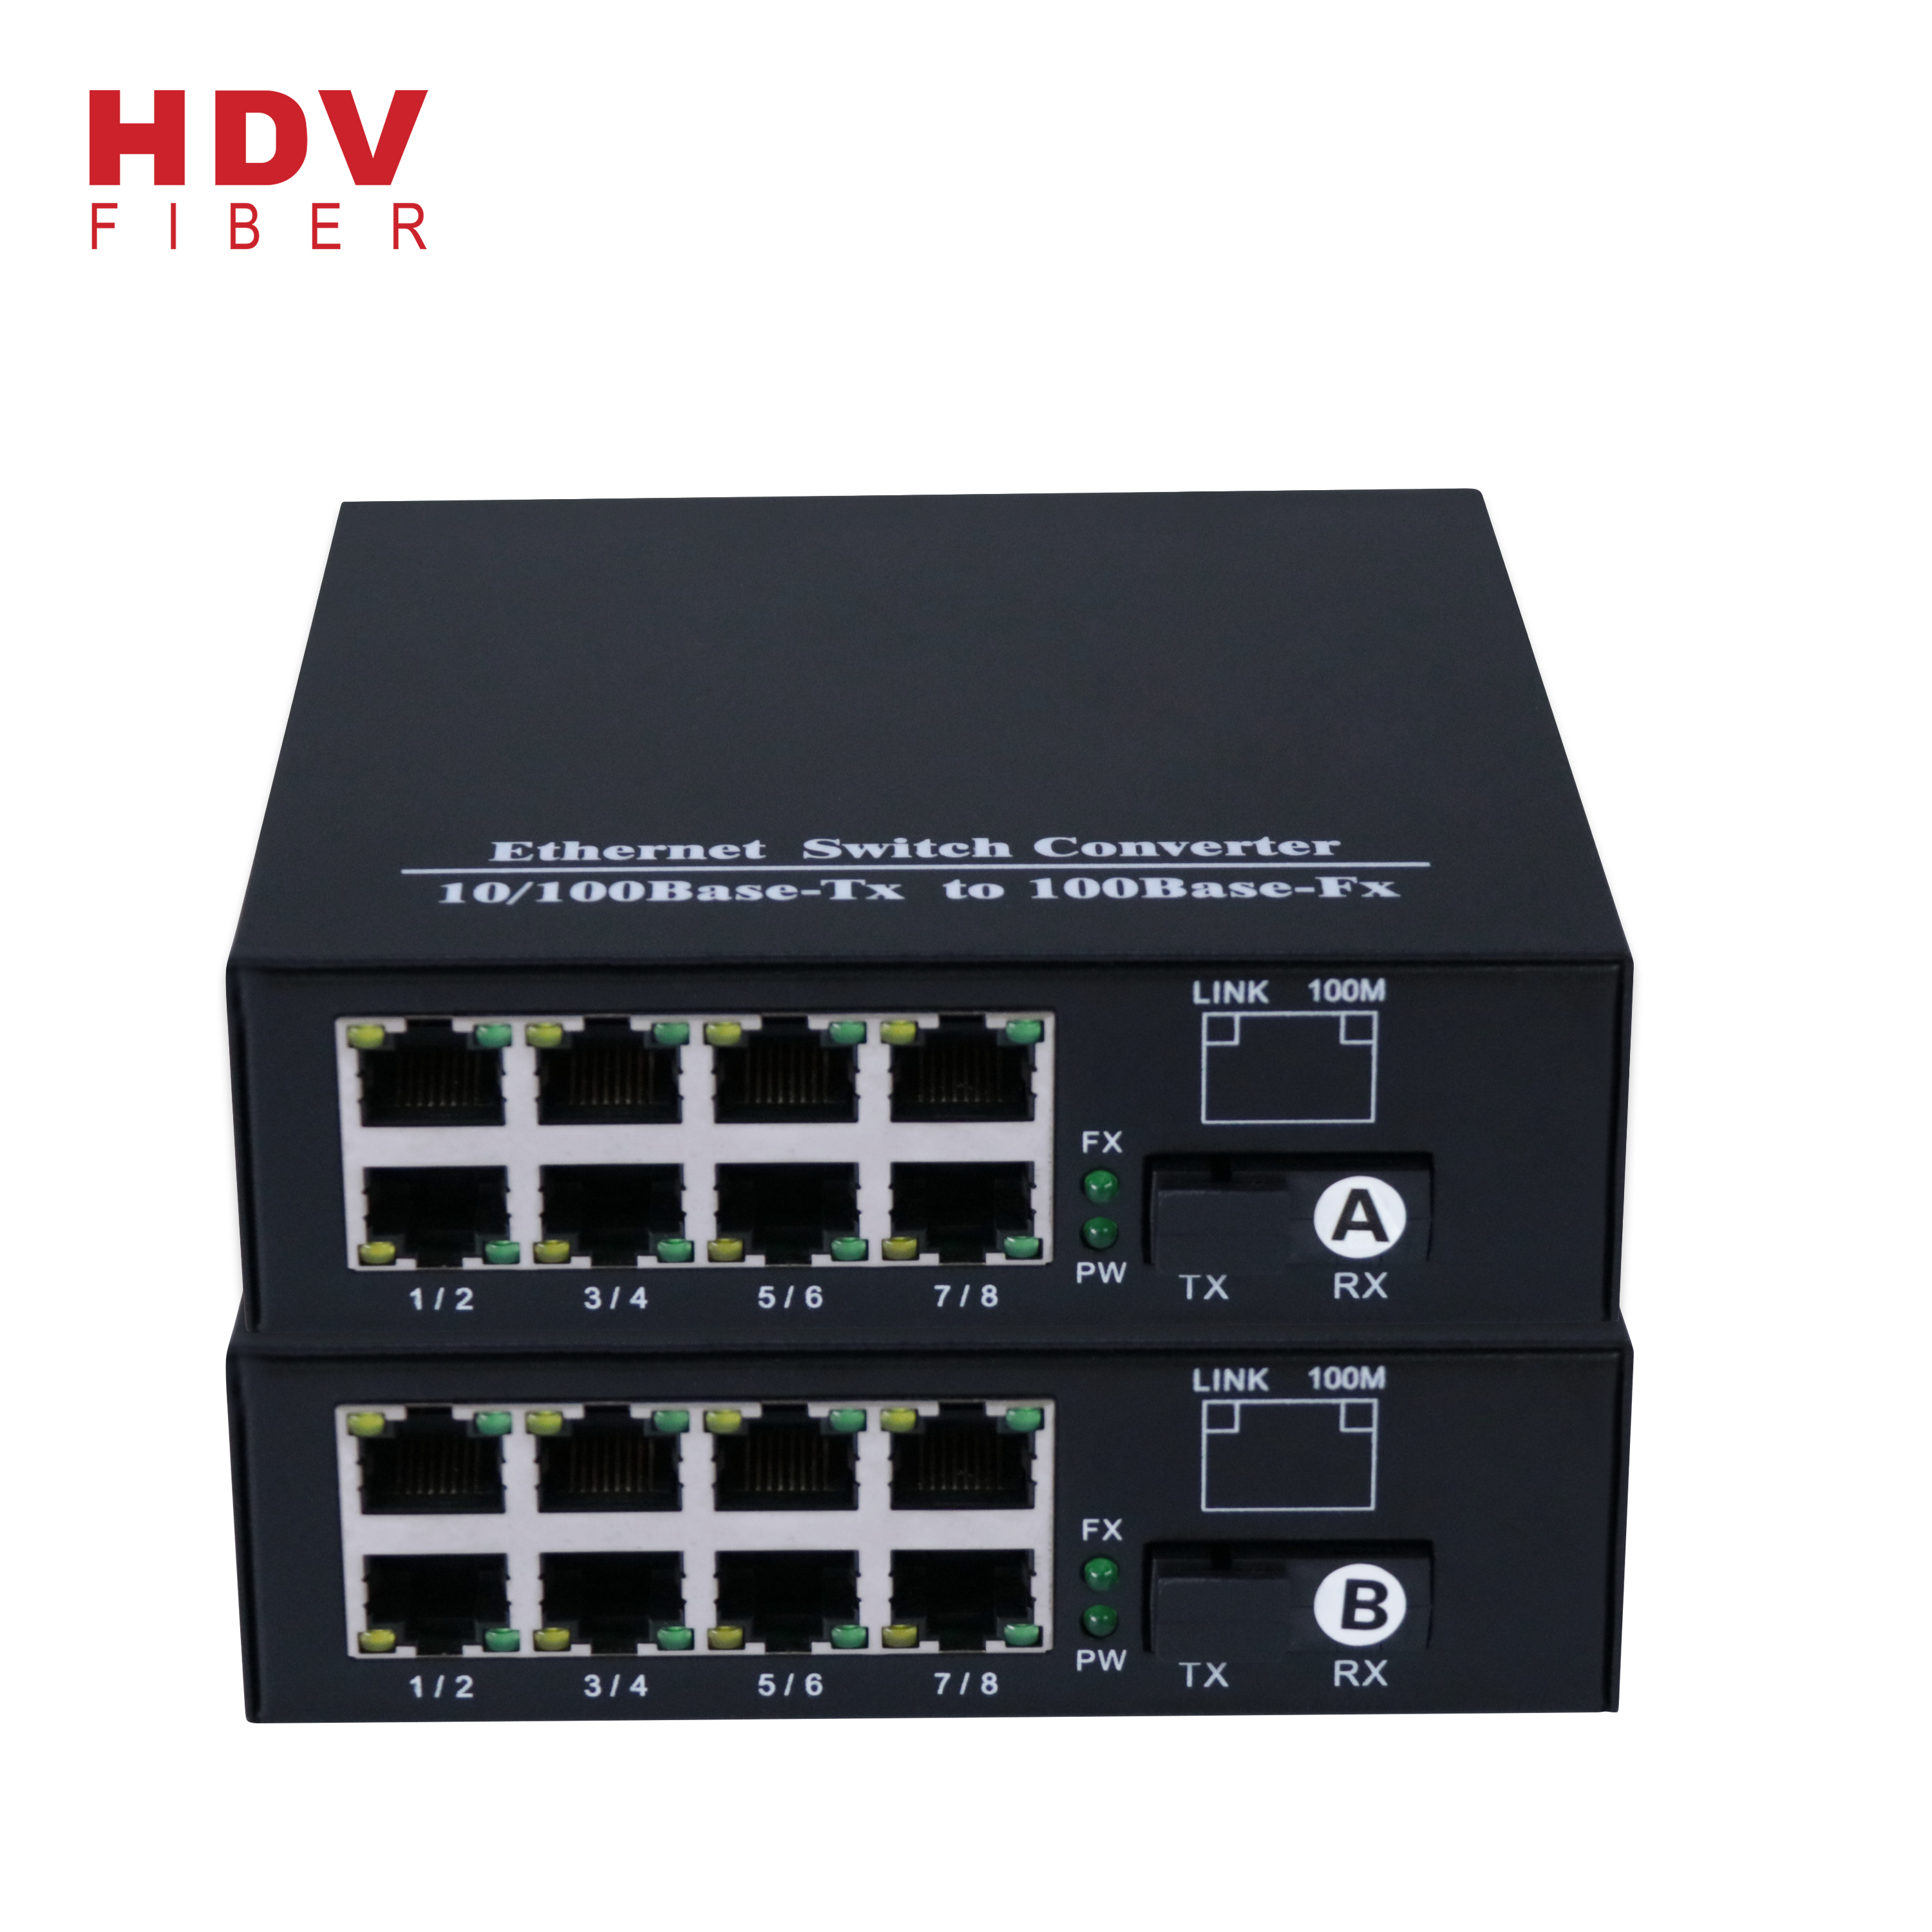 Wholesale Price China Wireless Ethernet Gateway – Fast 8 port ethernet switch 10 / 100 Mbps network switch Compatible cisco – HDV